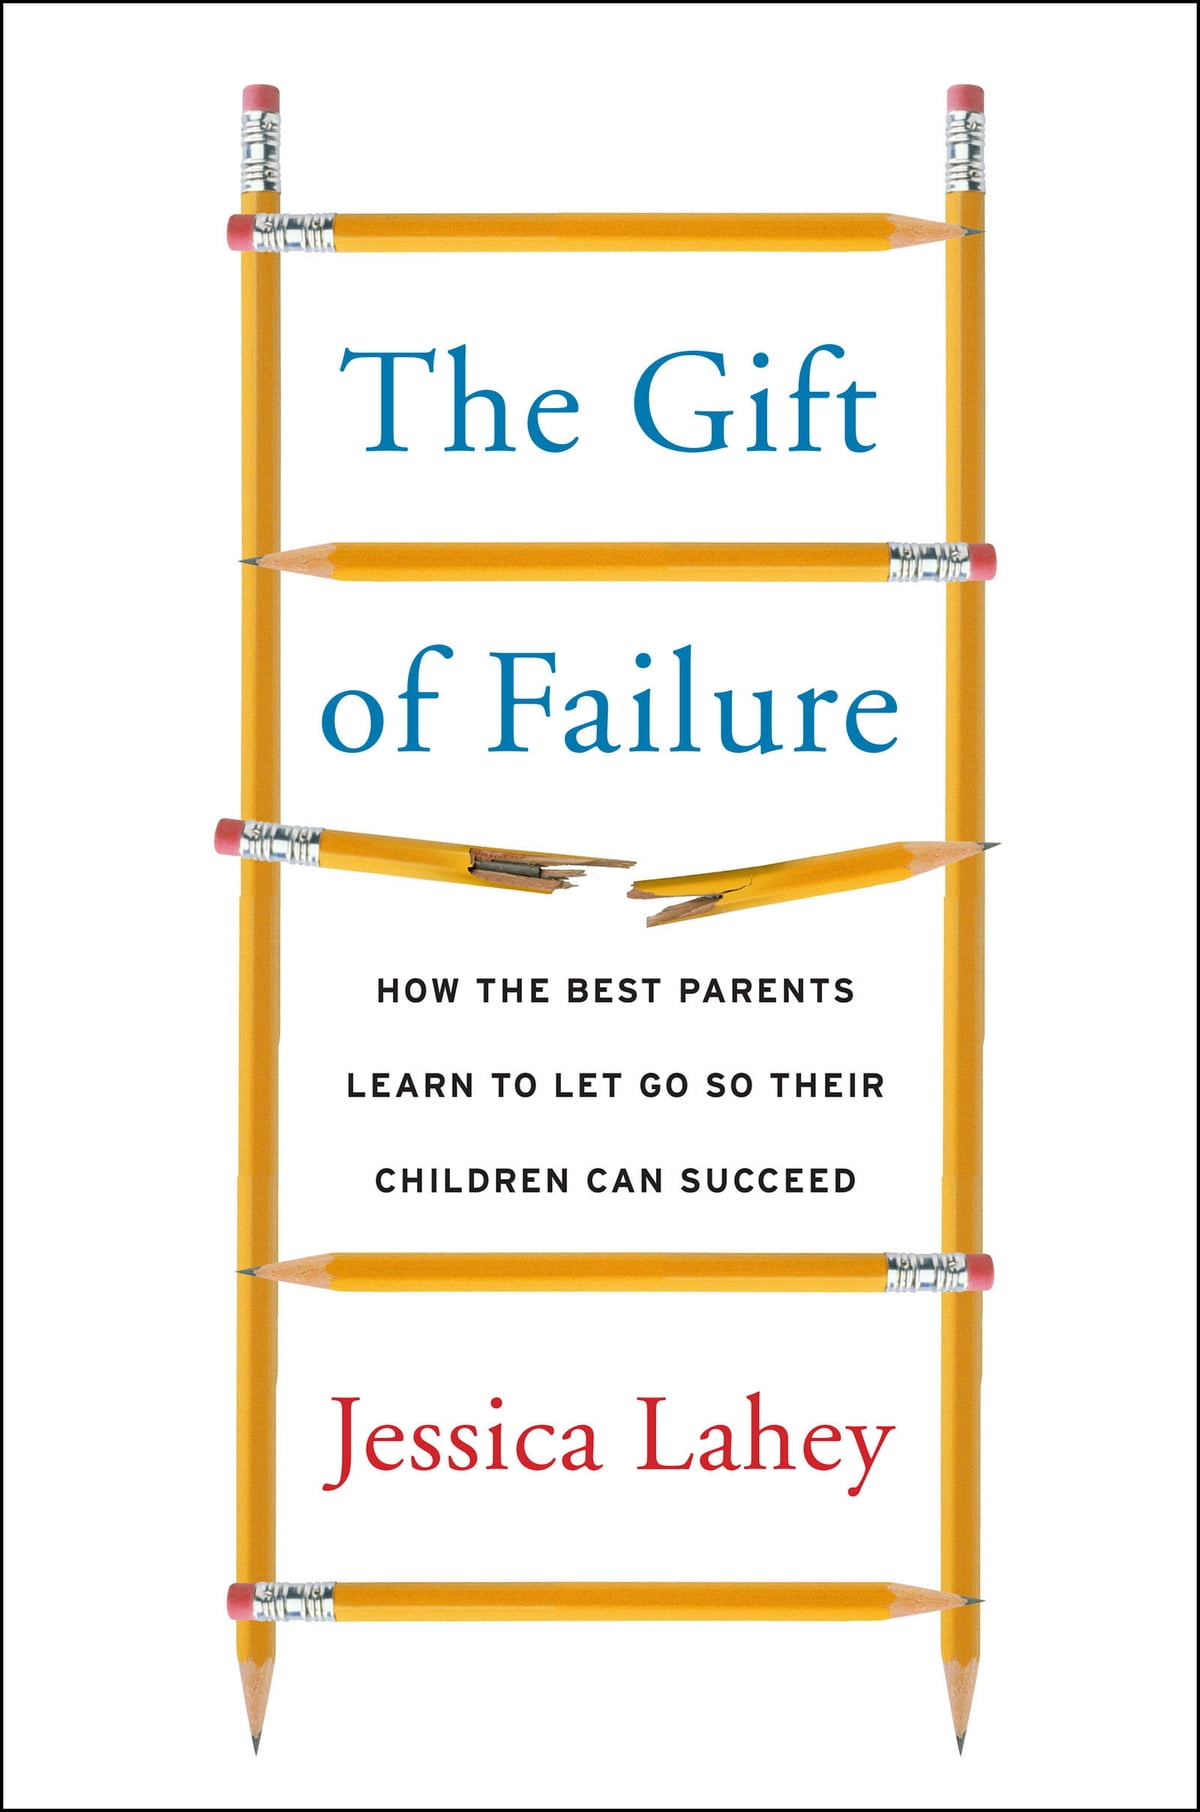 The Gift of Failure by Jessica Lahey